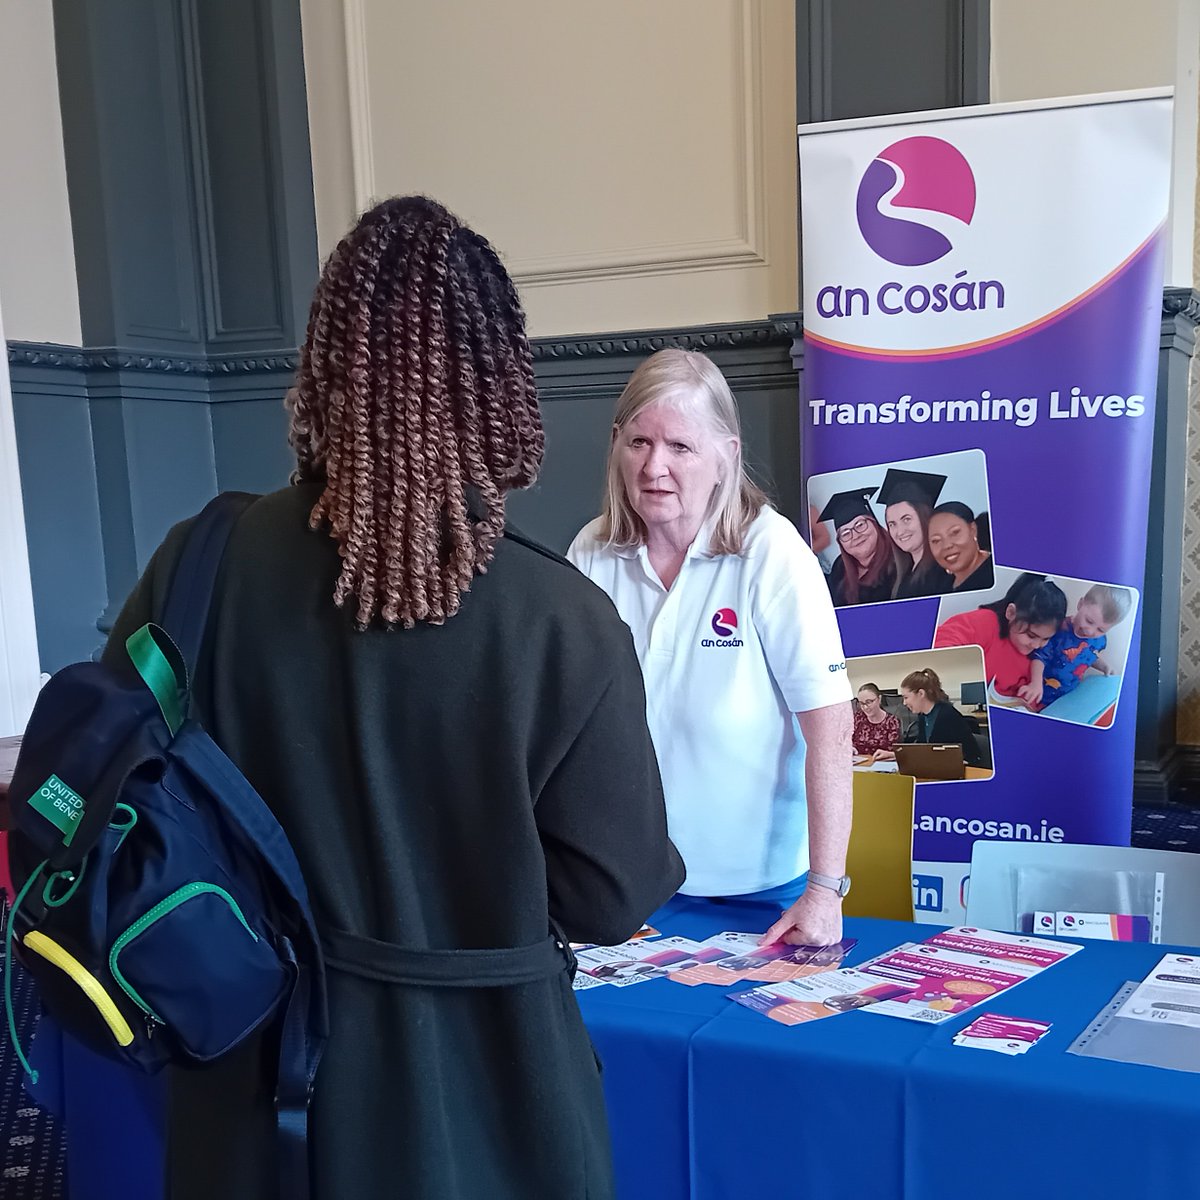 Our Outreach Officer, Imelda Hanratty, is enjoying sharing An Cosán's unique, holistic approach to #AdultEducation & #CommunityEducation at @tcddublin's Community Learning Fair. Do pop along for a chat! ##DLCFestival2024 #LifelongLearning #EmpowermentThroughEducation